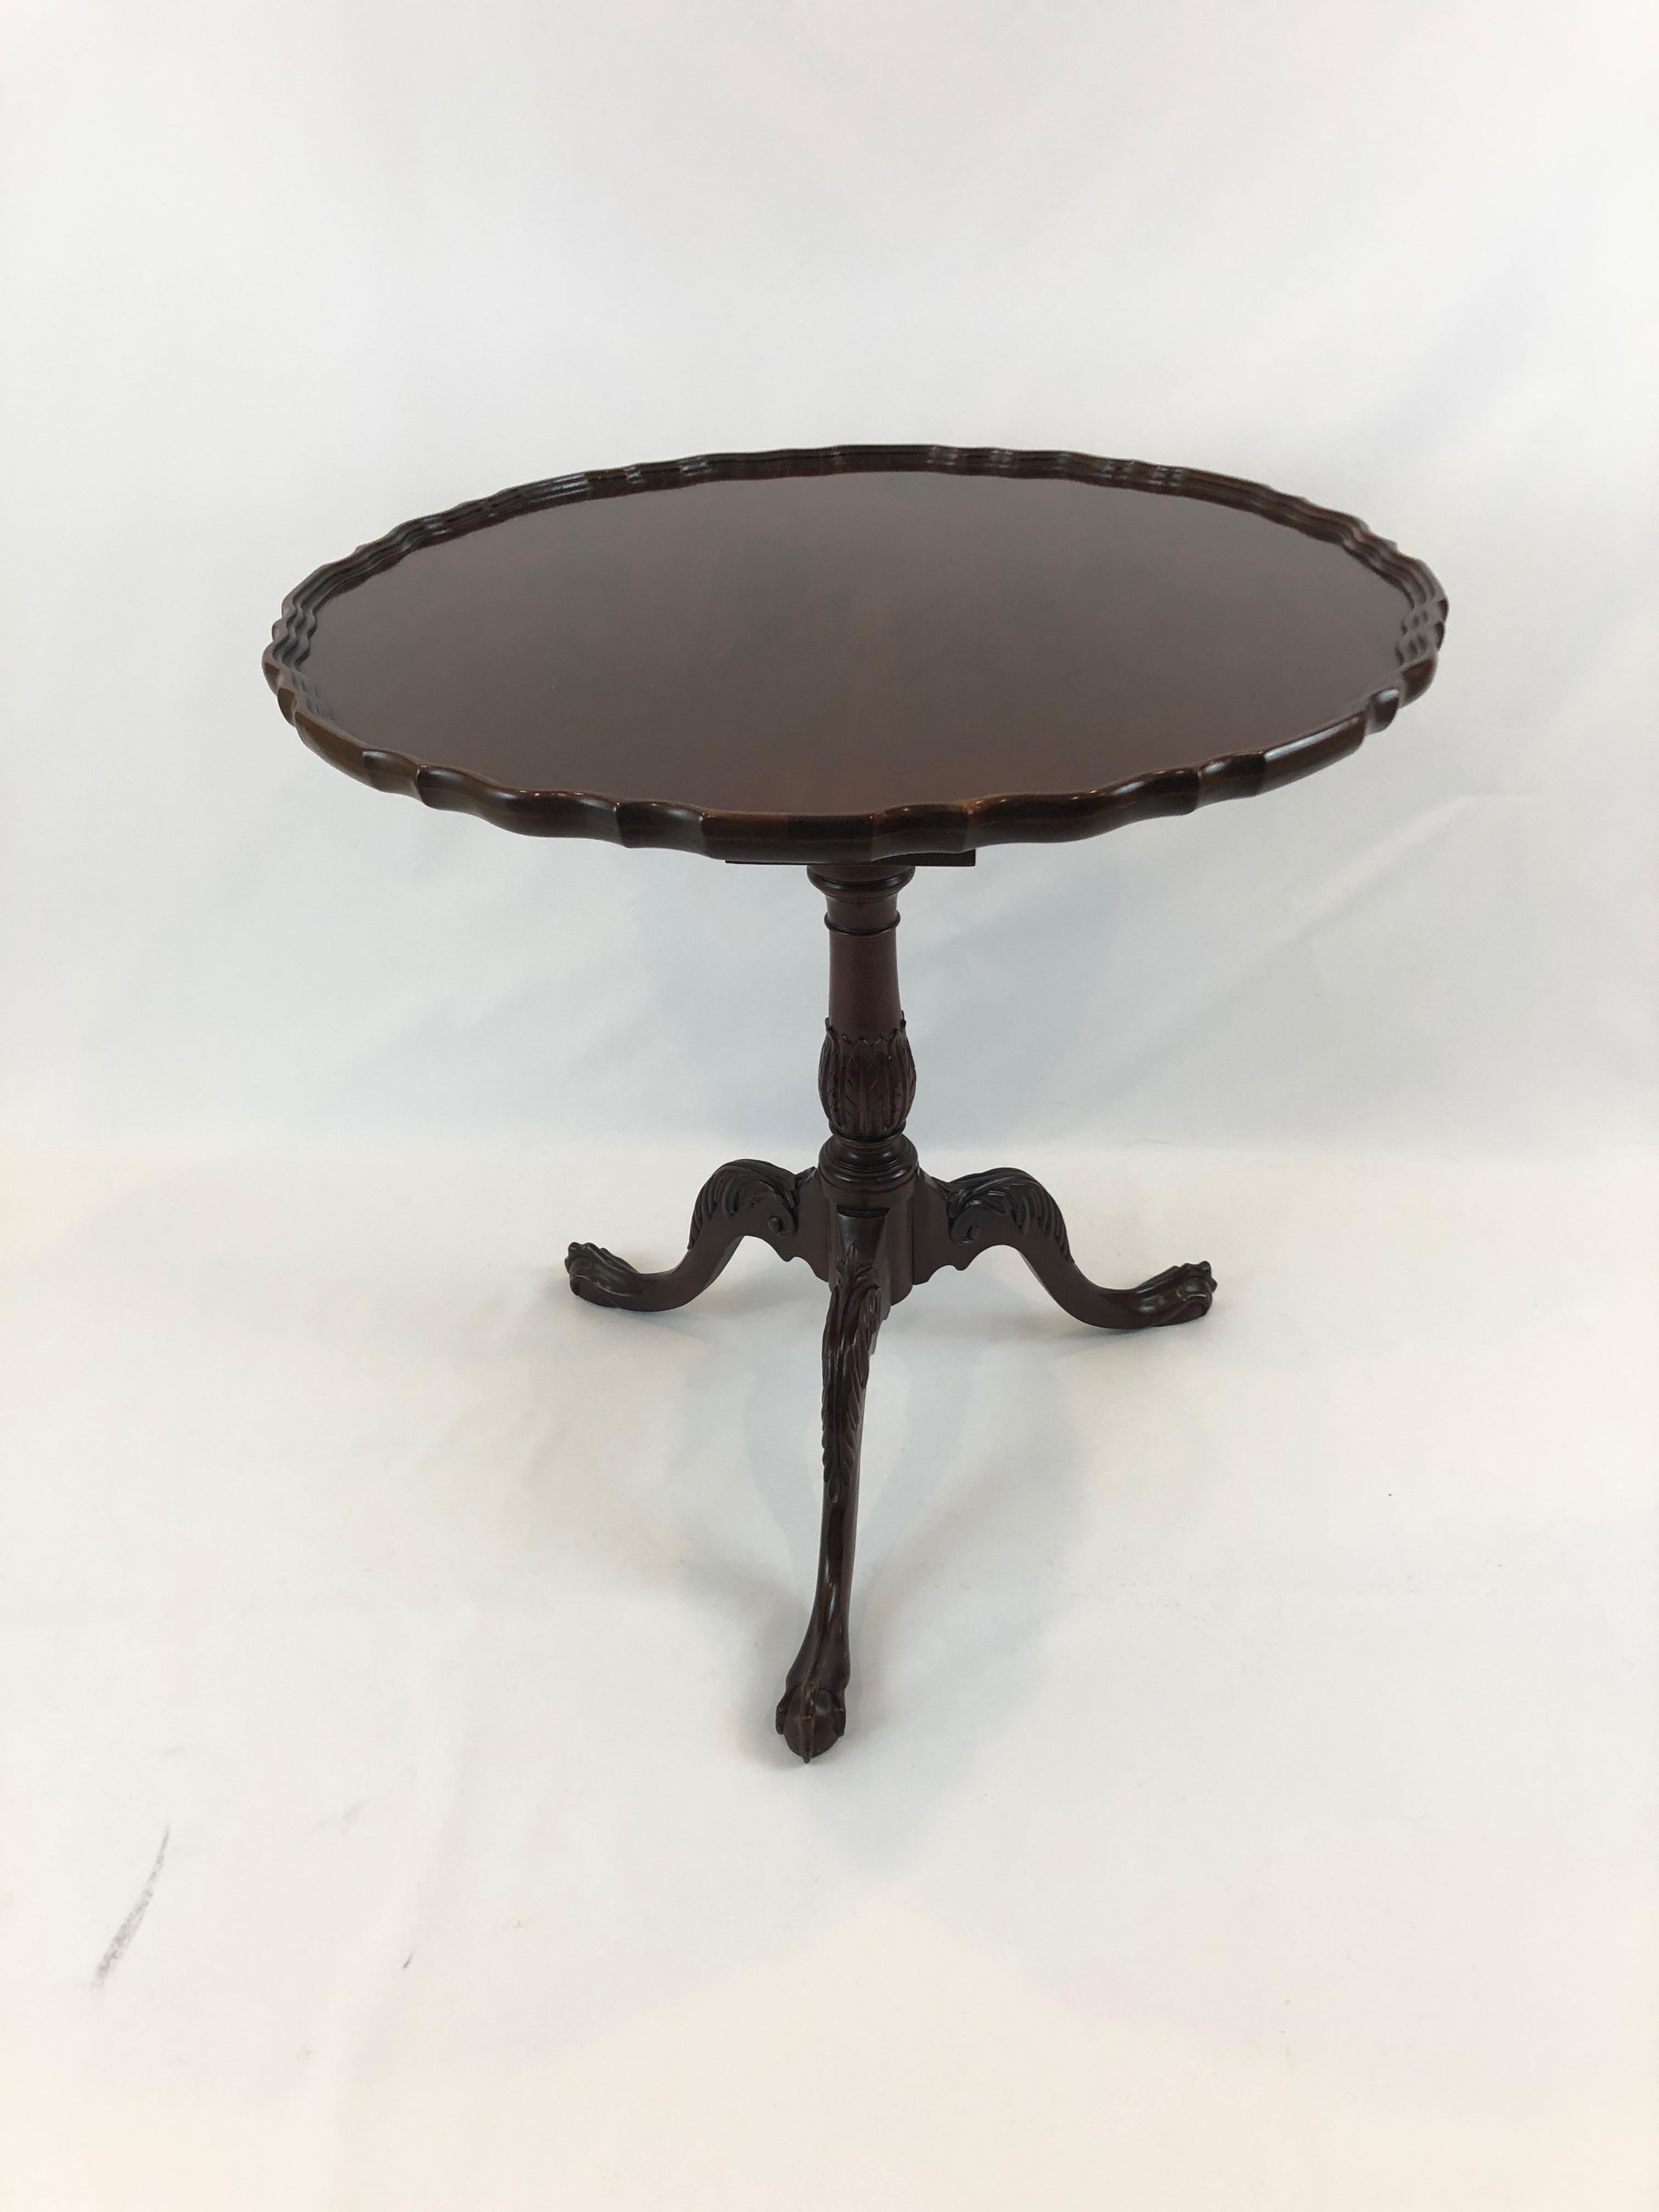 Traditional and timeless round tilt-top mahogany side table by Baker having a lovely pie crust edge, curved tripod legs and ball and claw feet.